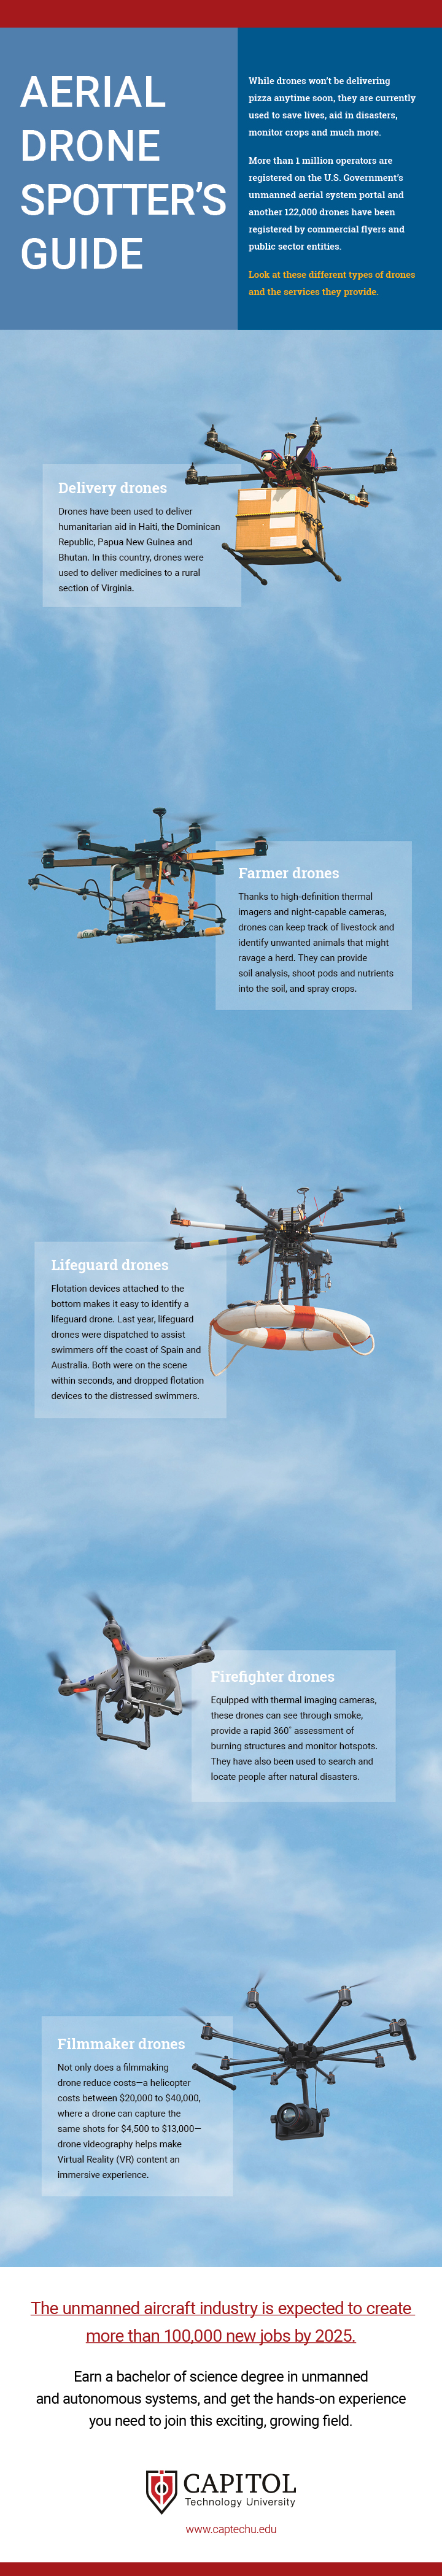 types of aerial drones used in saving lives infographic